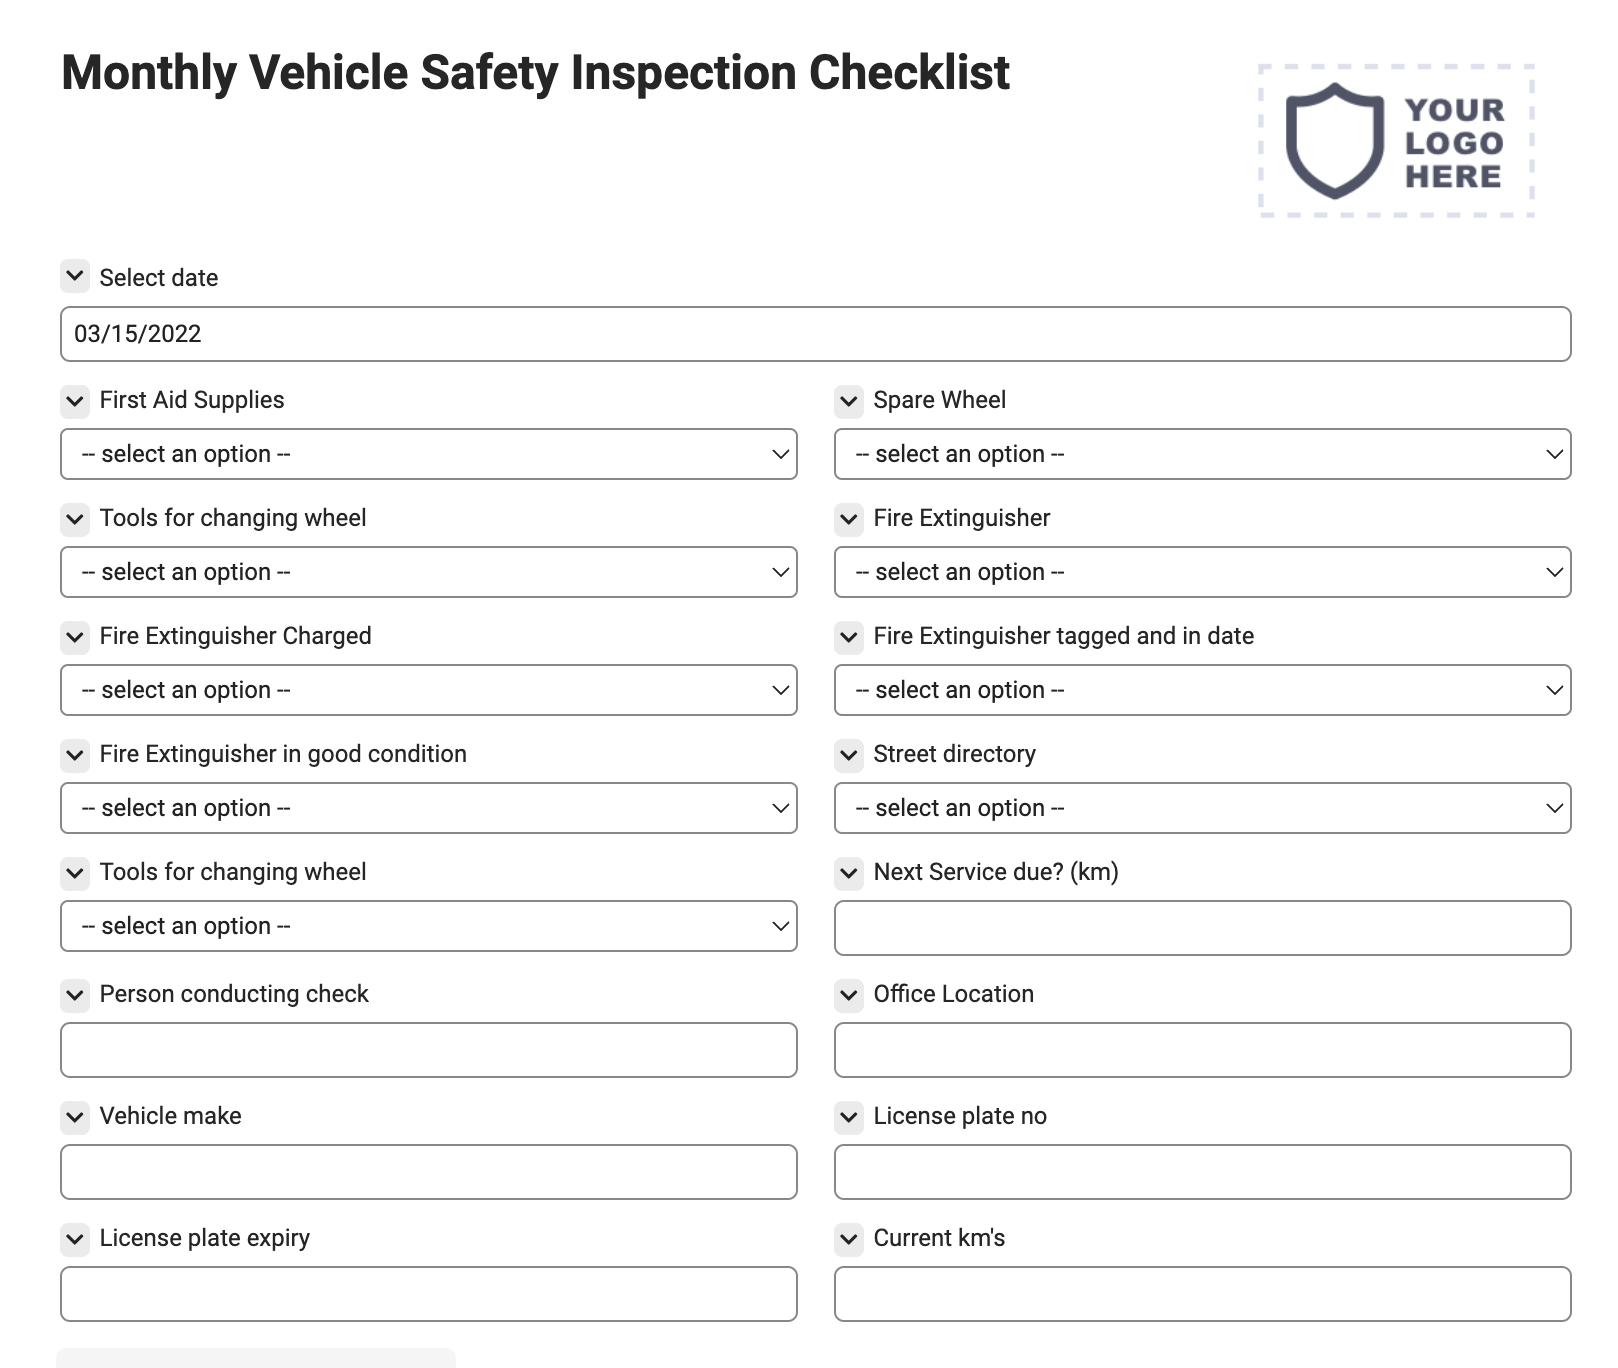 Monthly Vehicle Safety Inspection Checklist